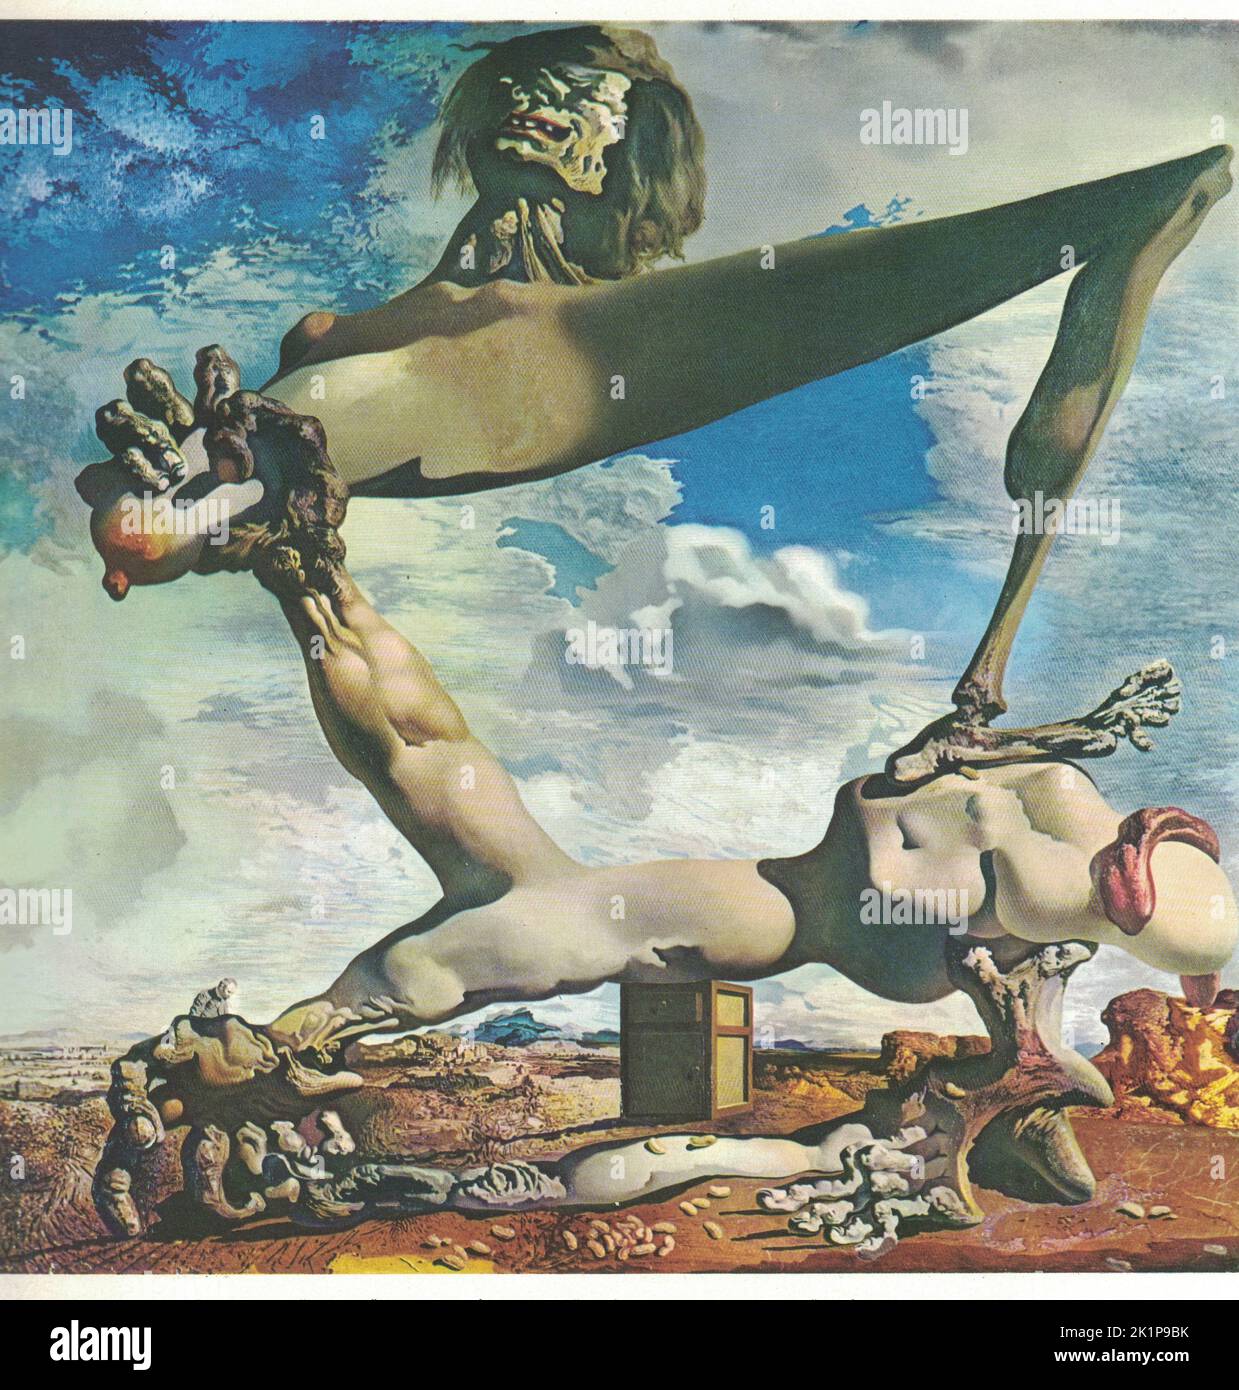 Premonition of Civil War (Soft Construction with Boiled Beans) ,1936, oil on canvas. Painting by Salvador Dali. Salvador Dalí (11 May 1904 – 23 January 1989) was a Spanish surrealist artist renowned for his technical skill, precise draftsmanship, and the striking and bizarre images in his work. Born in Figueres, Catalonia, Spain, Dalí received his formal education in fine arts in Madrid. Influenced by Impressionism and the Renaissance masters from a young age he became increasingly attracted to Cubism and avant-garde movements. He moved closer to Surrealism in the late 1920s and joined the Sur Stock Photo